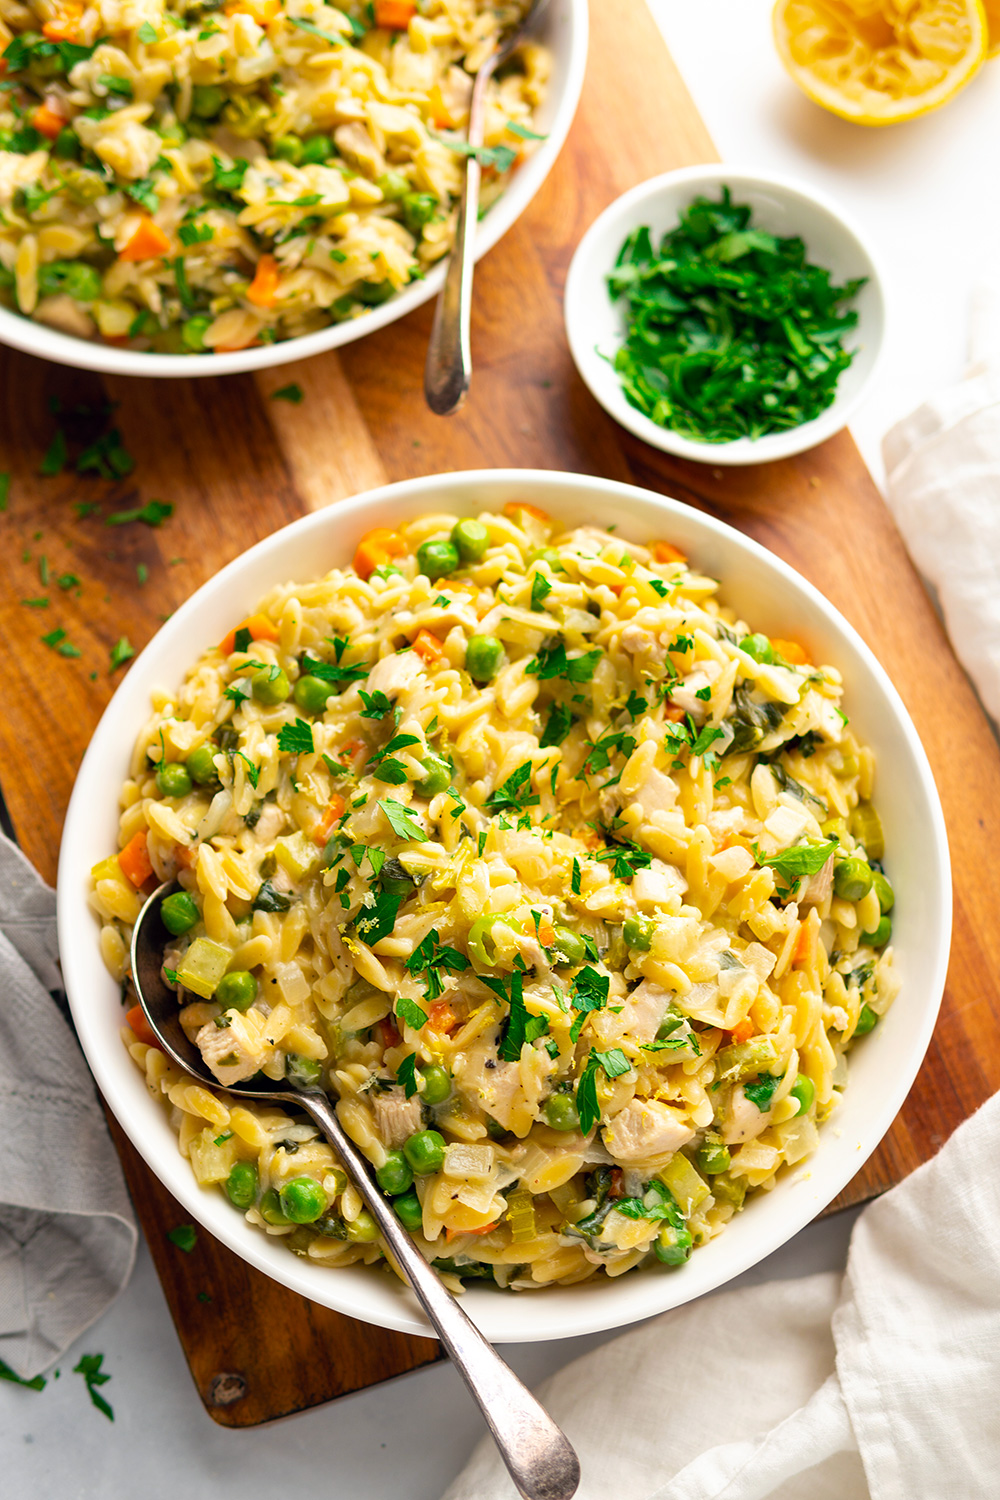 Chicken Orzo Recipe With Peas, Spinach, Cream and Parmesan